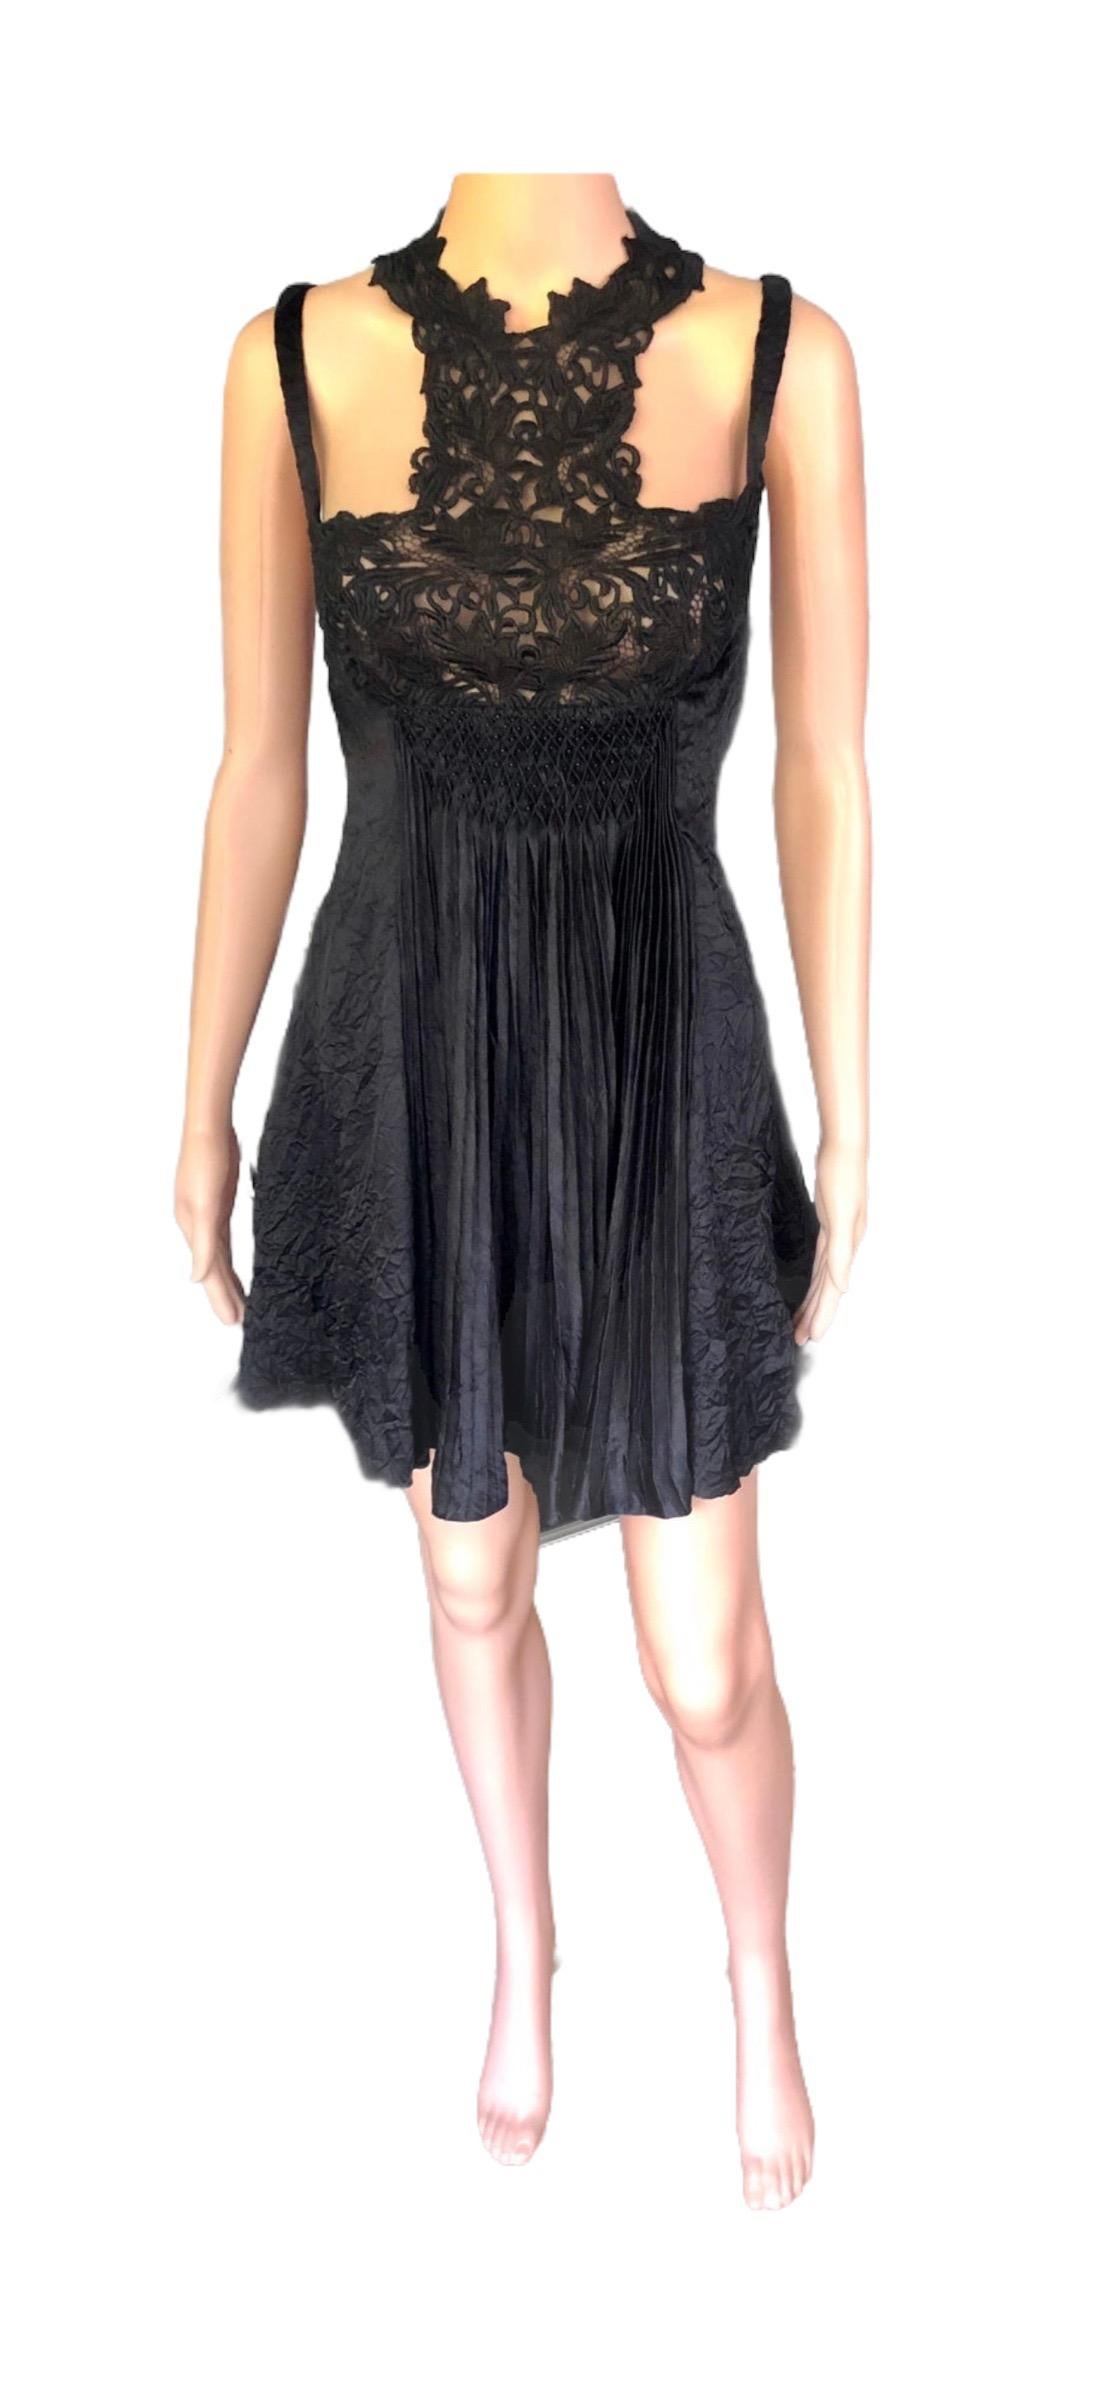 Gianni Versace S/S 1994 Runway Couture Vintage Crinkle Silk Lace Black Dress For Sale 6